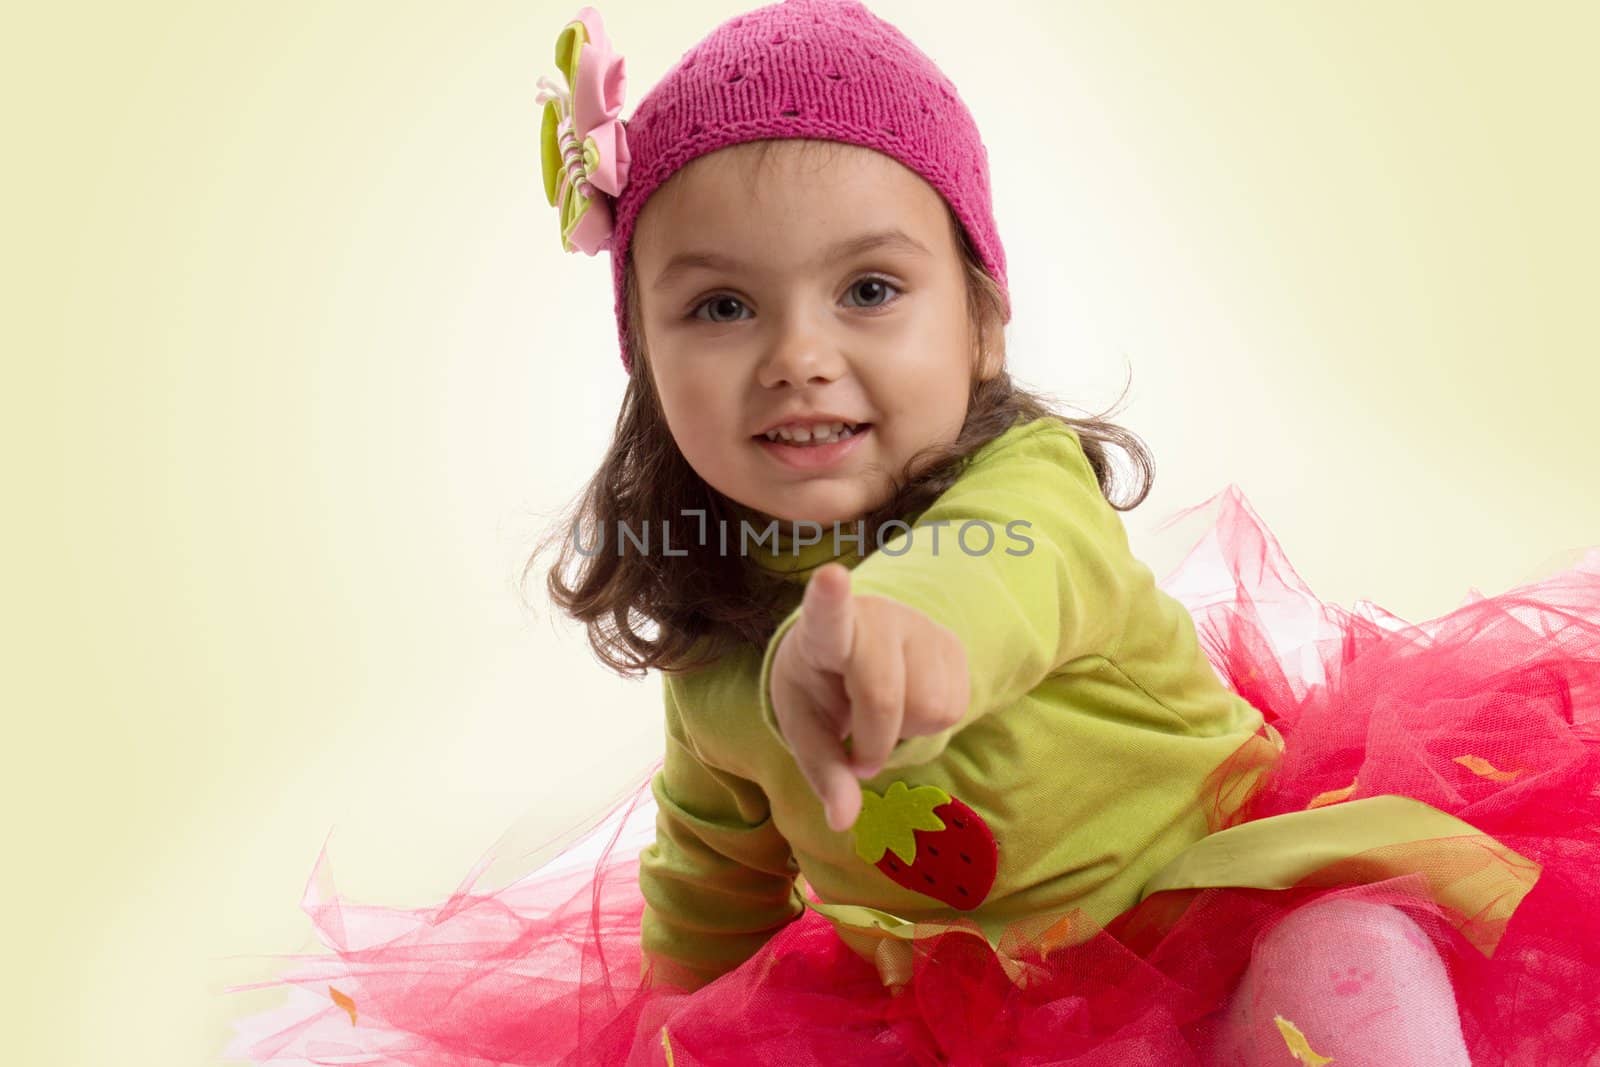 Adorable girl in tutu and hat with butterfly pointing over green back